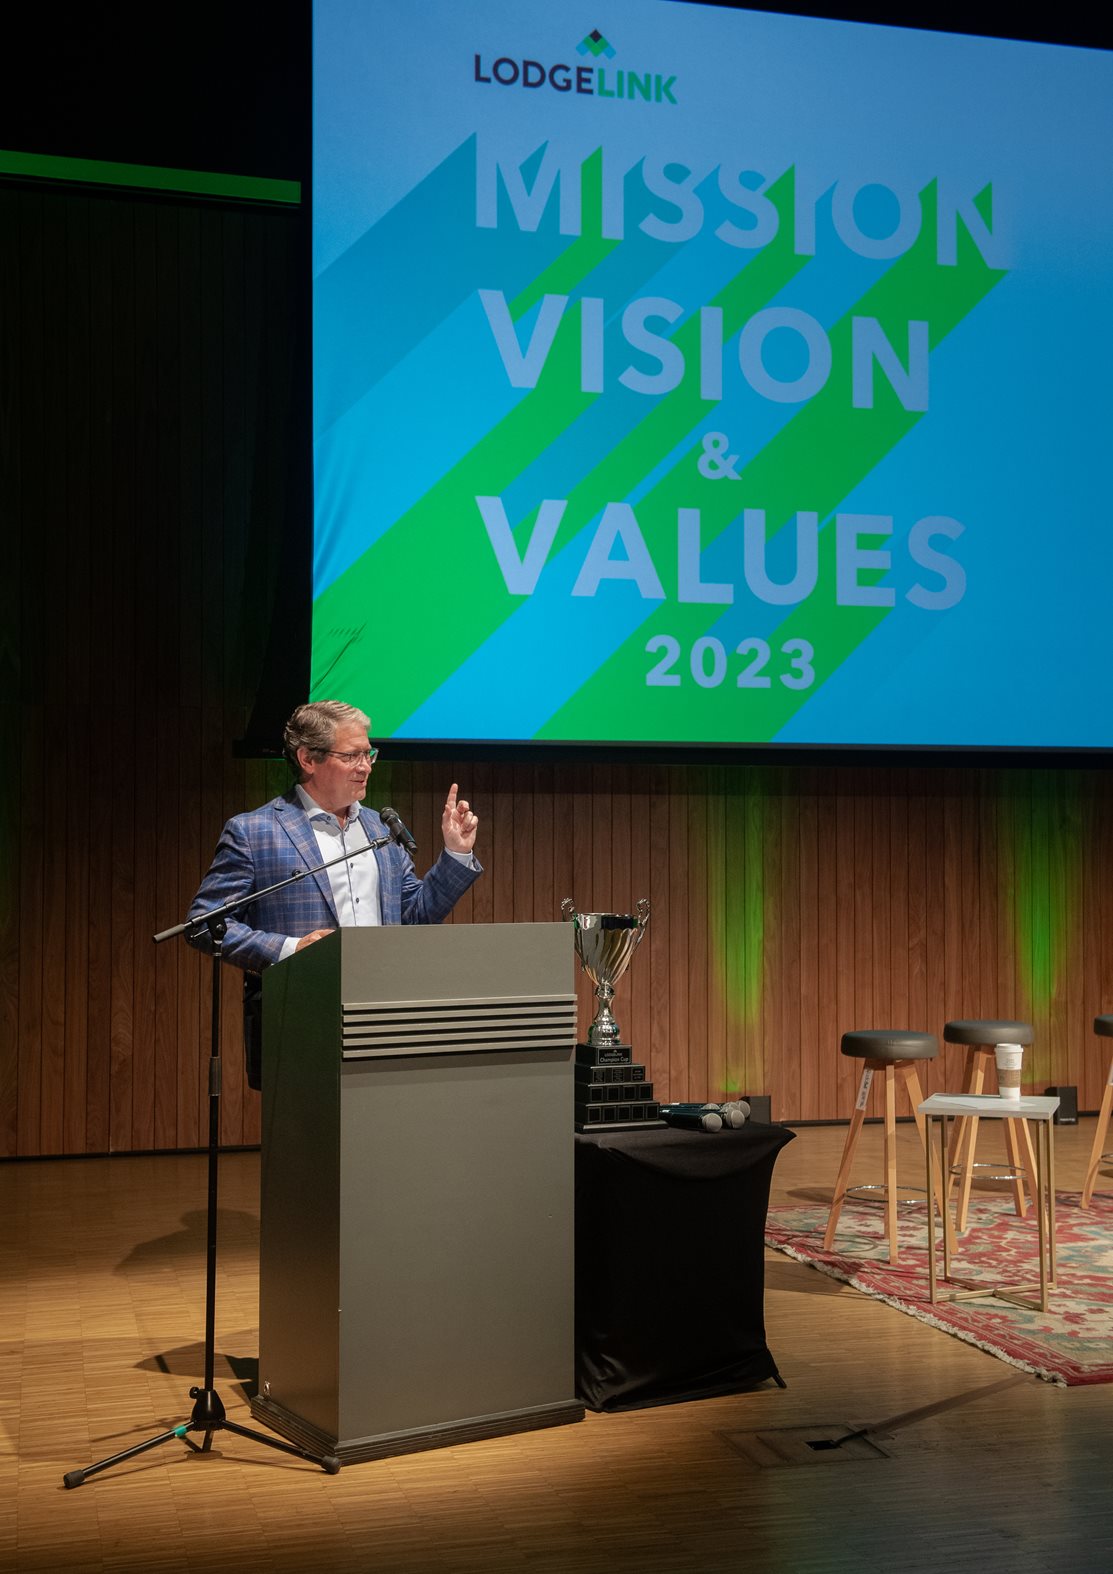 LodgeLink's President and CEO speaking at the Mission, Vision, Values event.